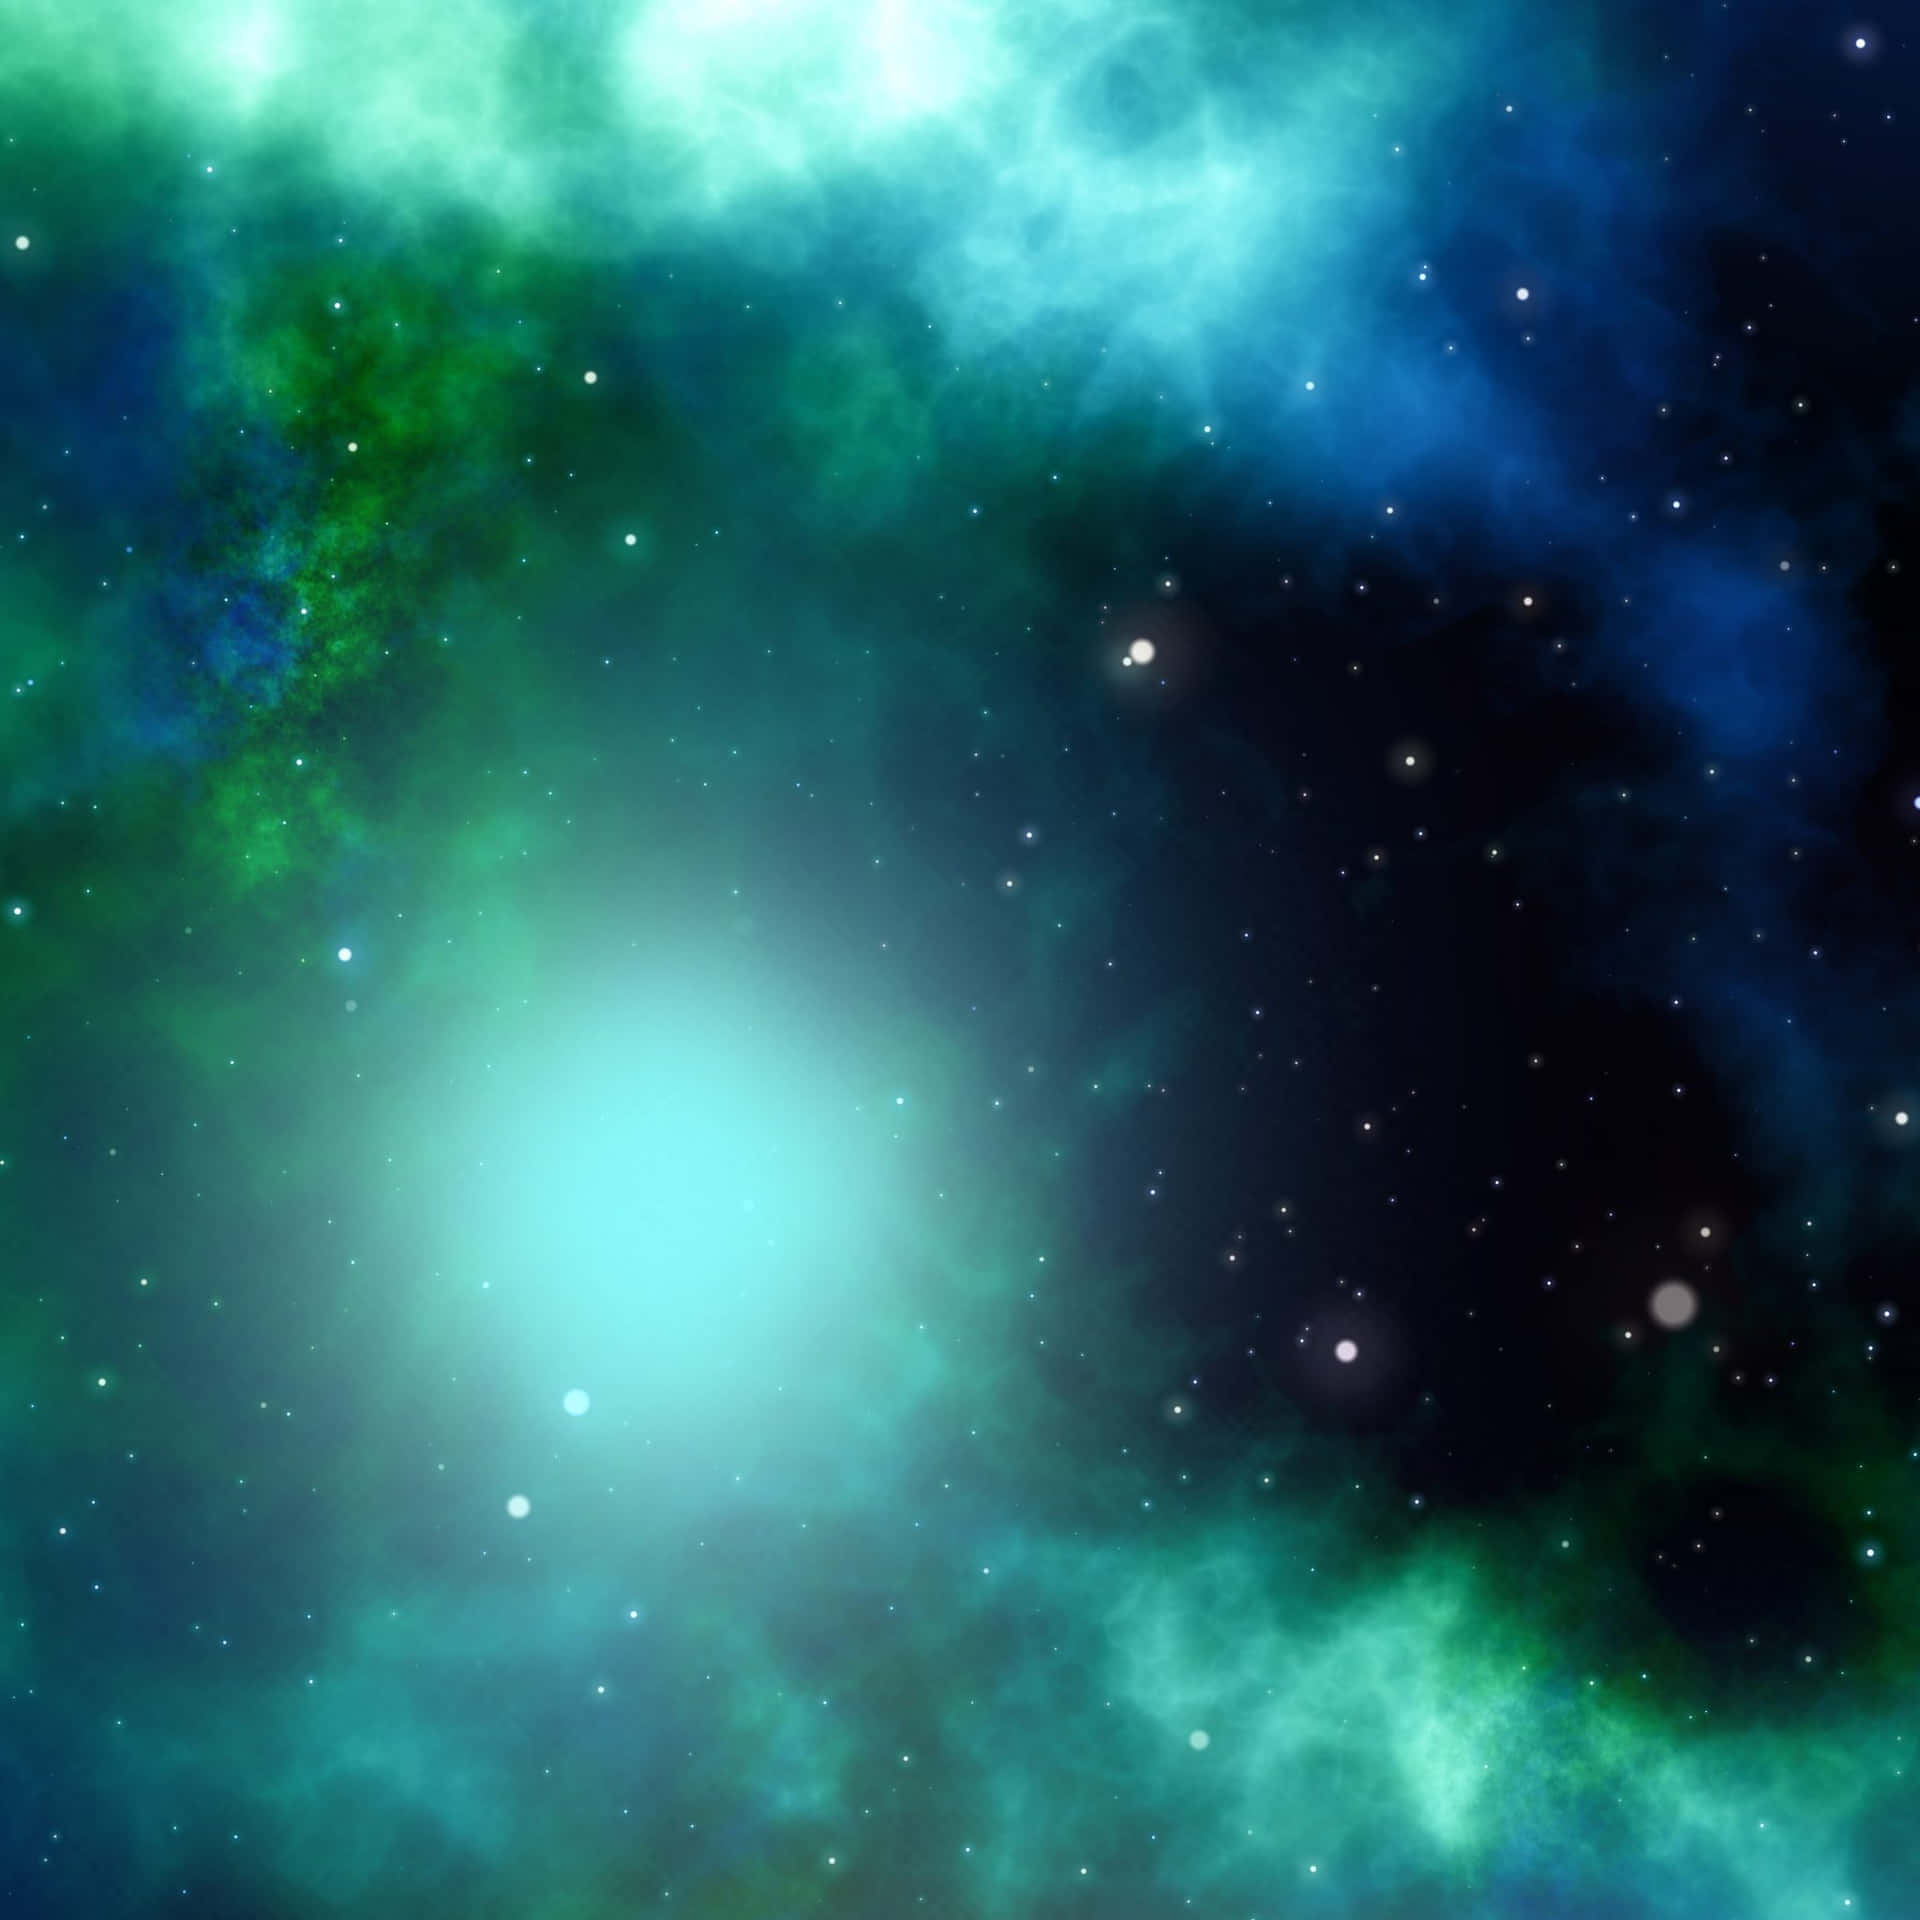 Eternity revealed in the beauty of a faraway green and blue galaxy Wallpaper